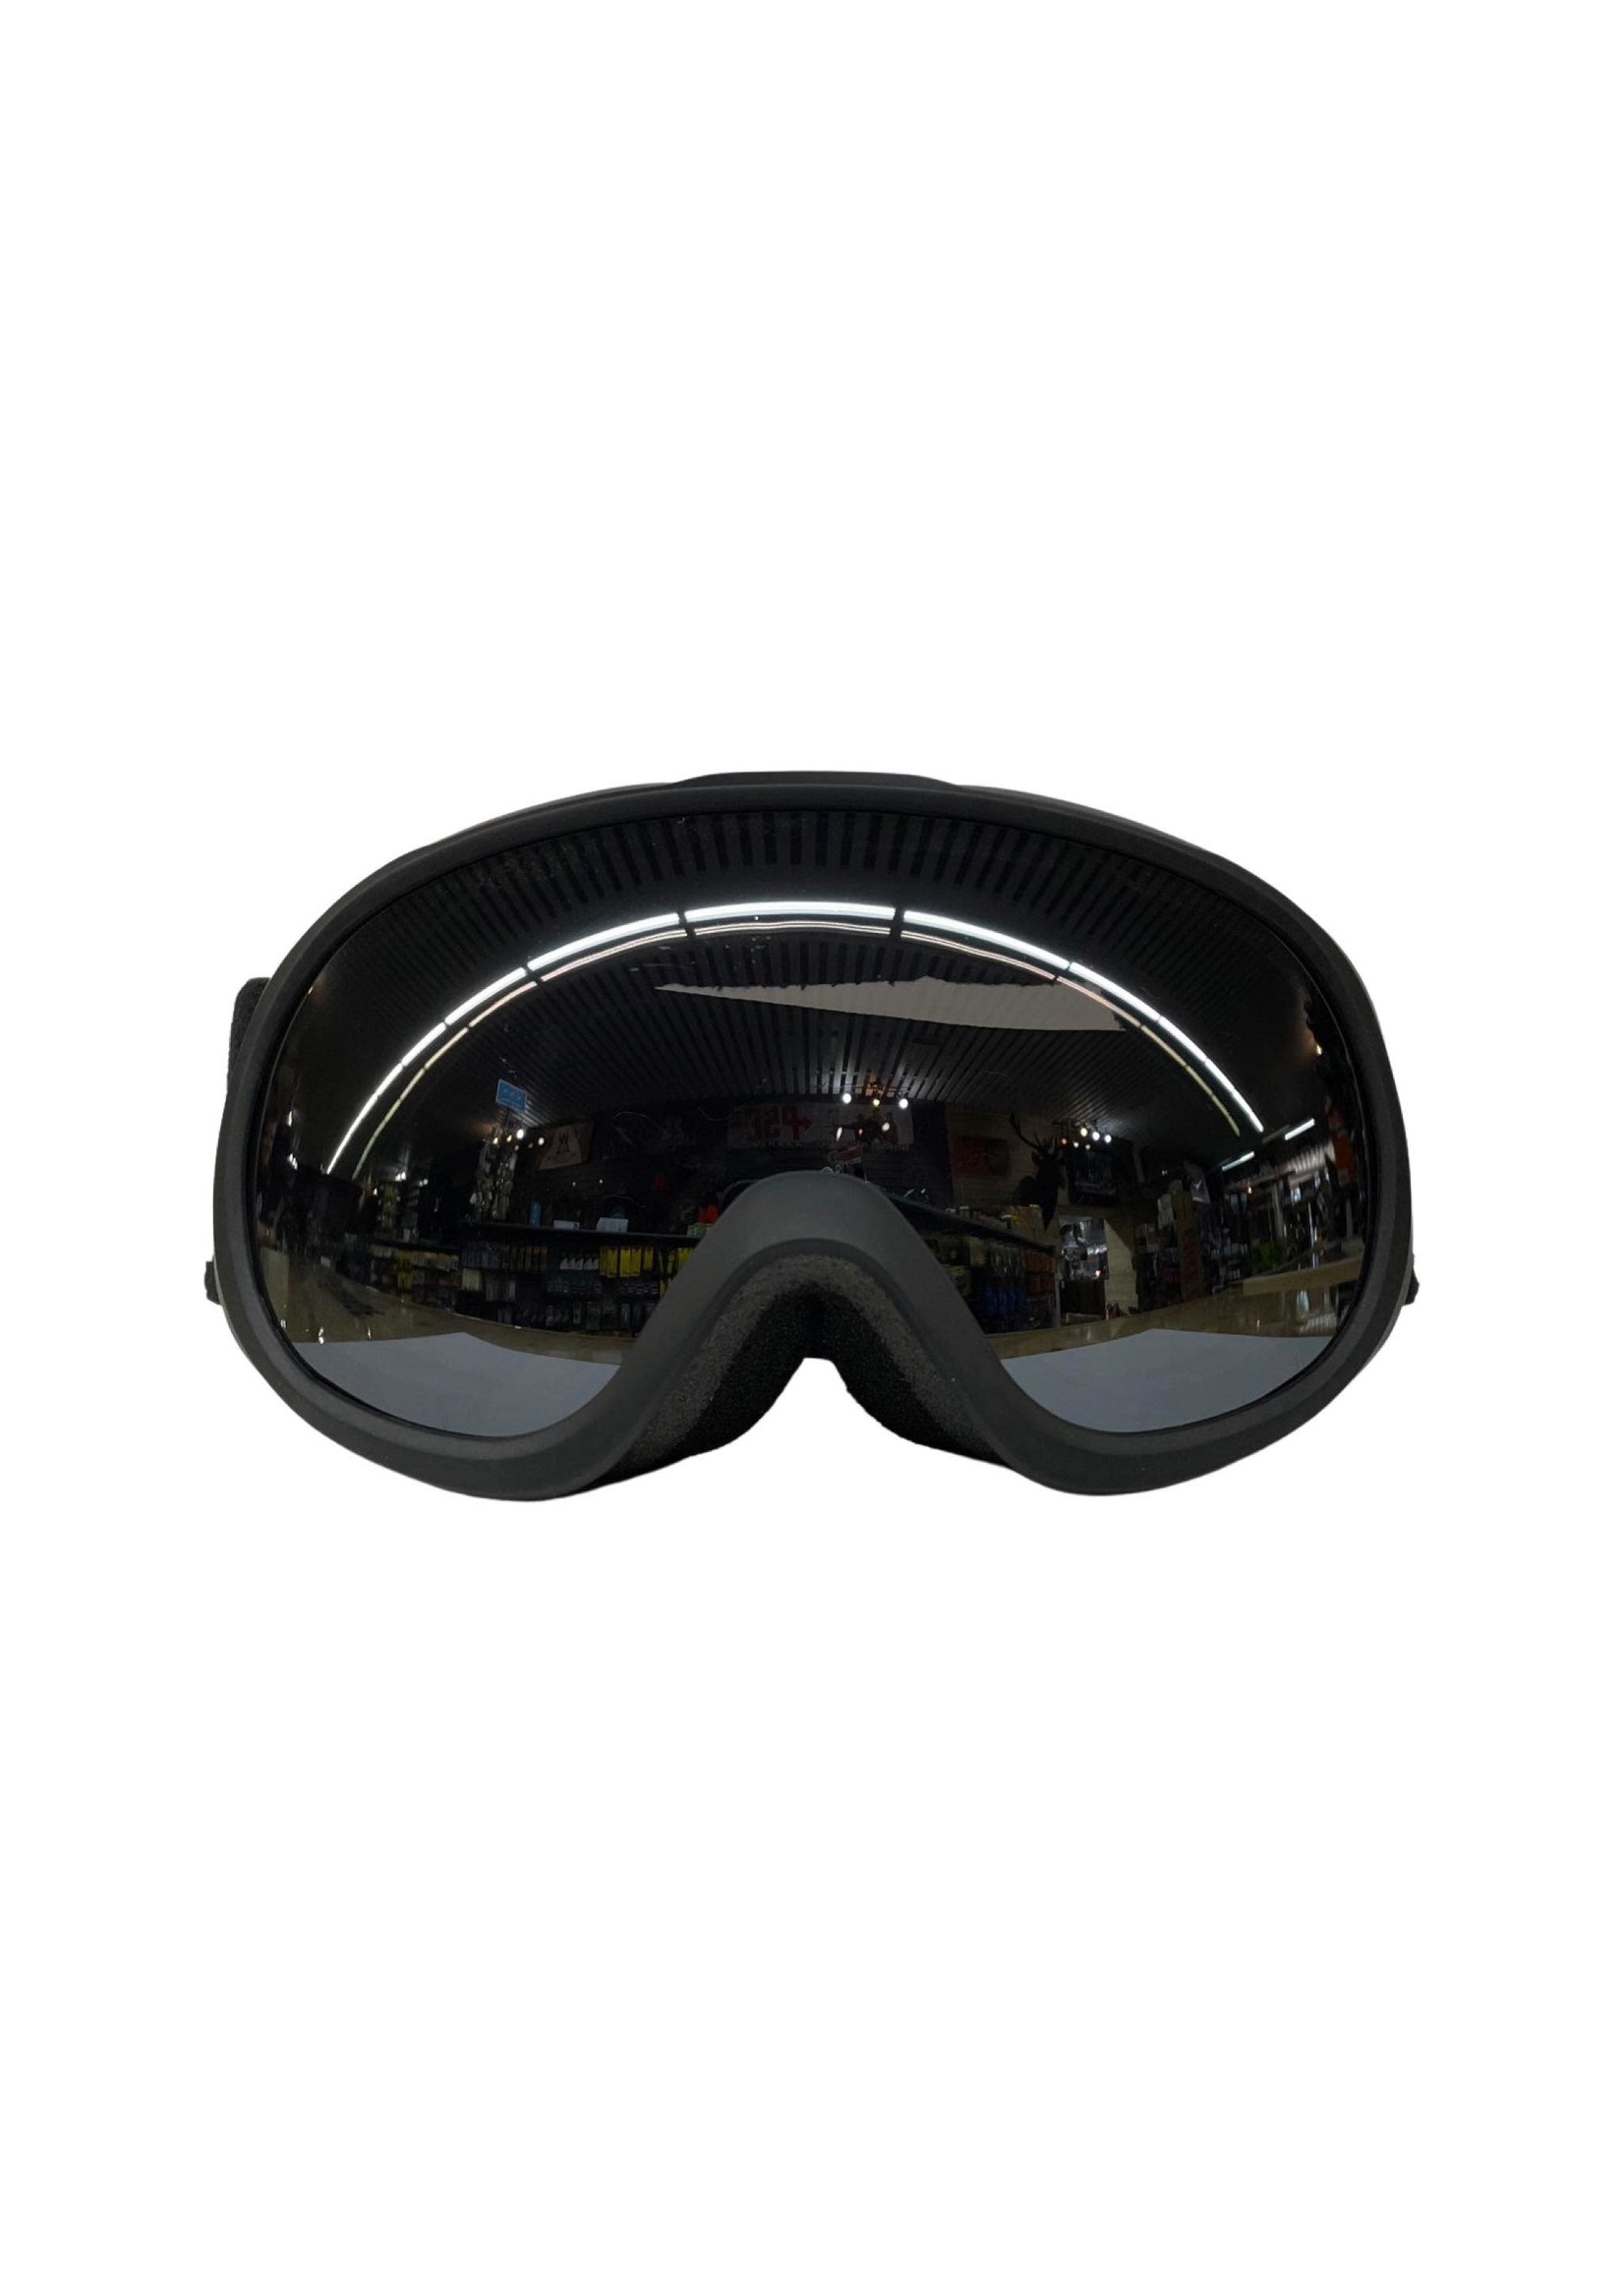 SEVEN PEAKS SEVEN PEAKS BUBBLE BABY/YOUTH BLK GOGGLE